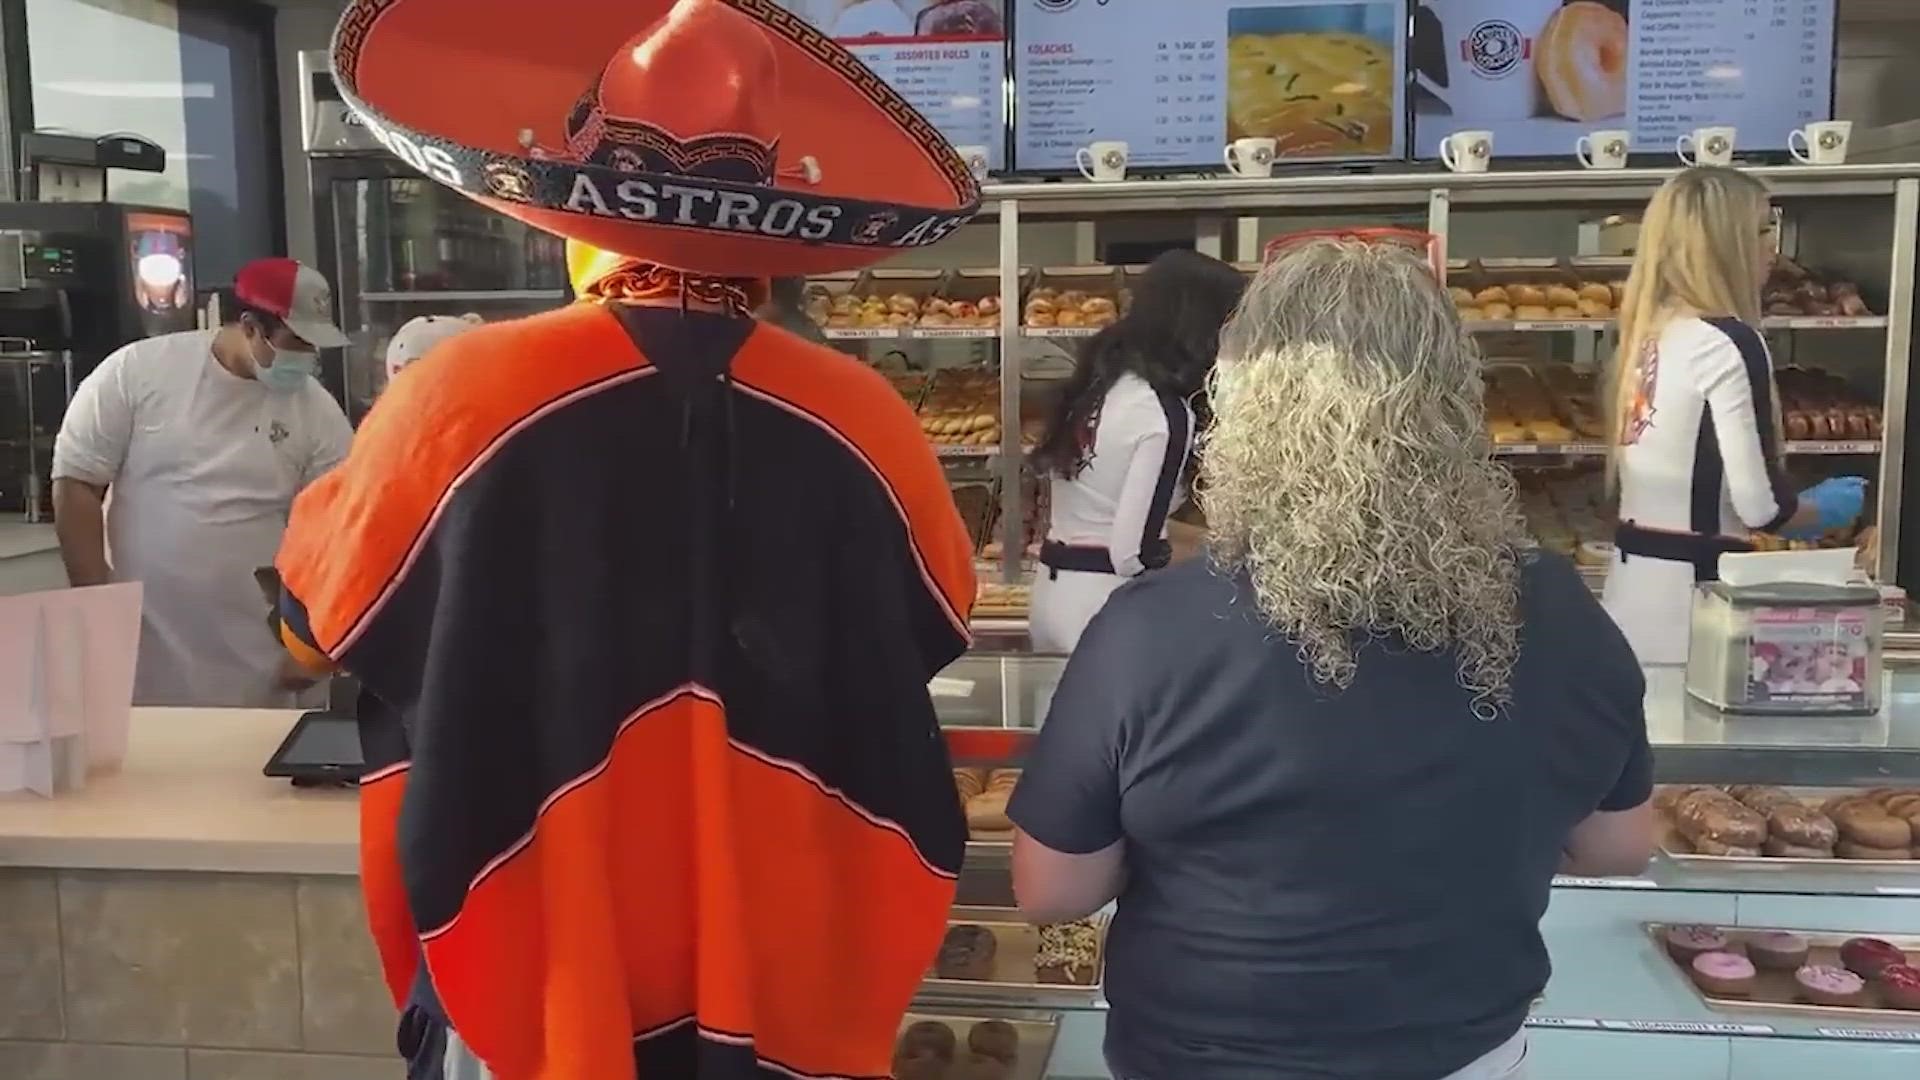 Opening day is here! Astros fans stopped by Shipley's Do-Nuts for a giveaway and other goodies to support their 'Stros!